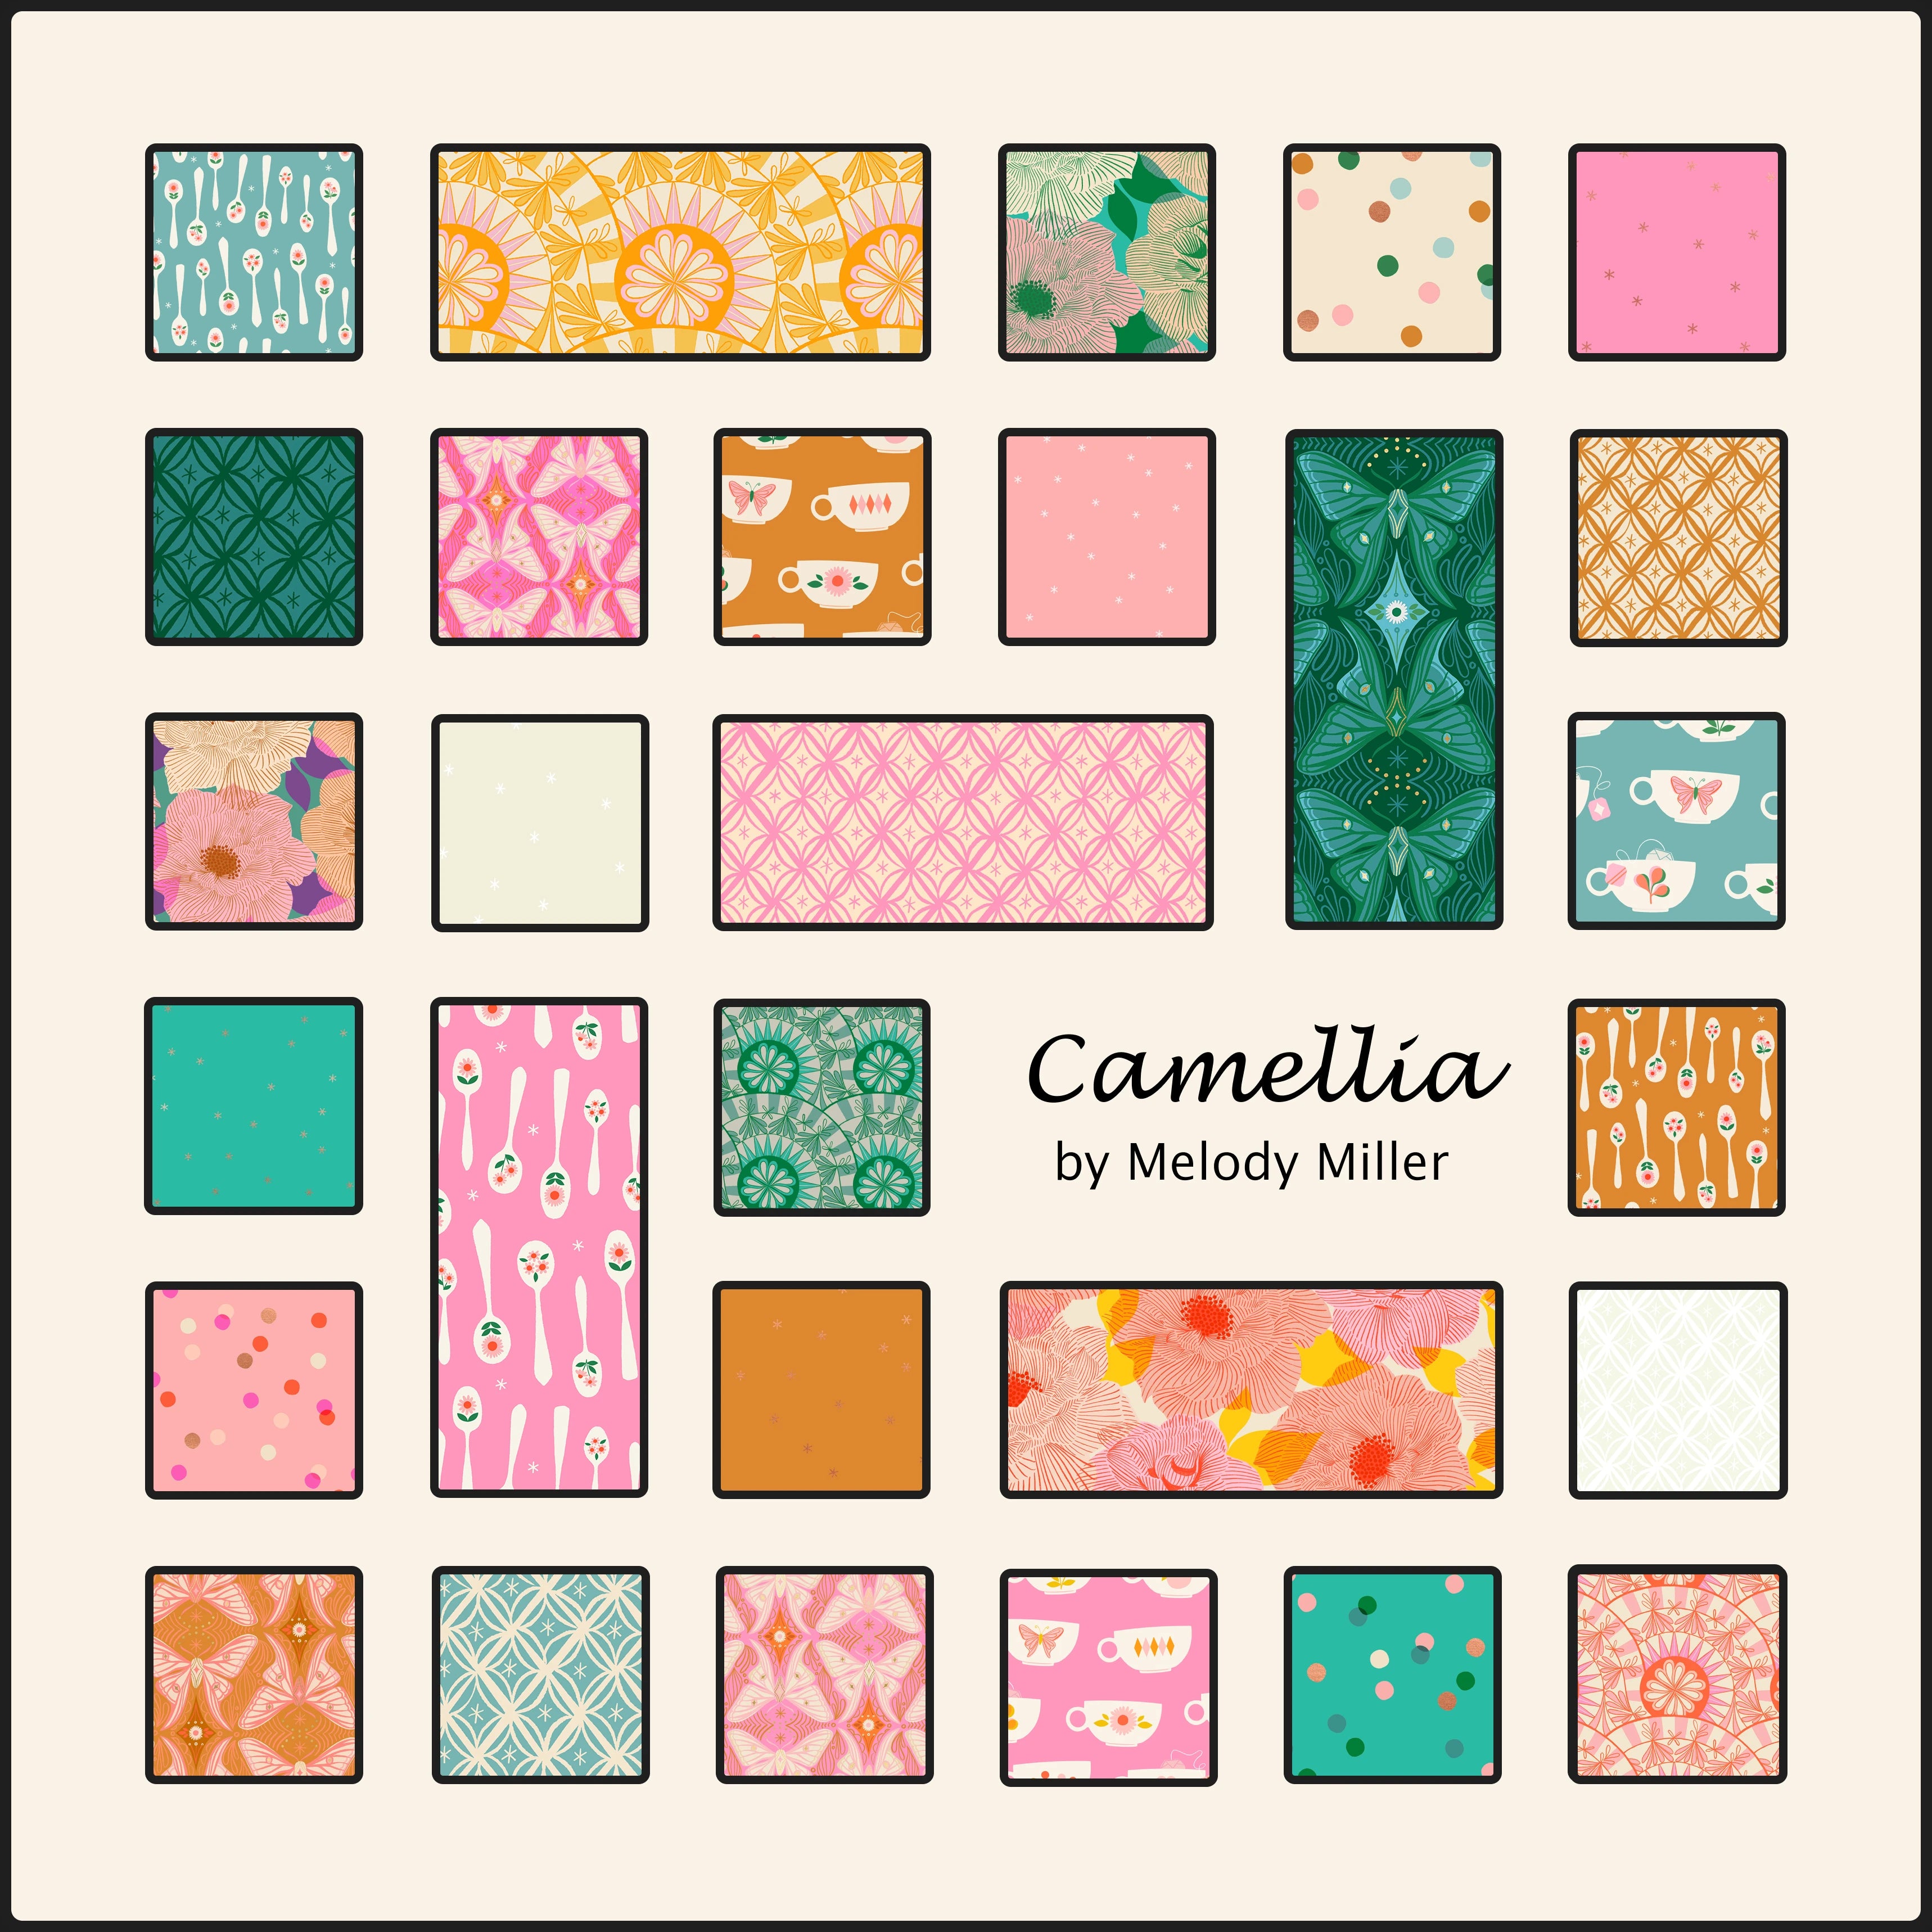 Camellia by Melody Miller